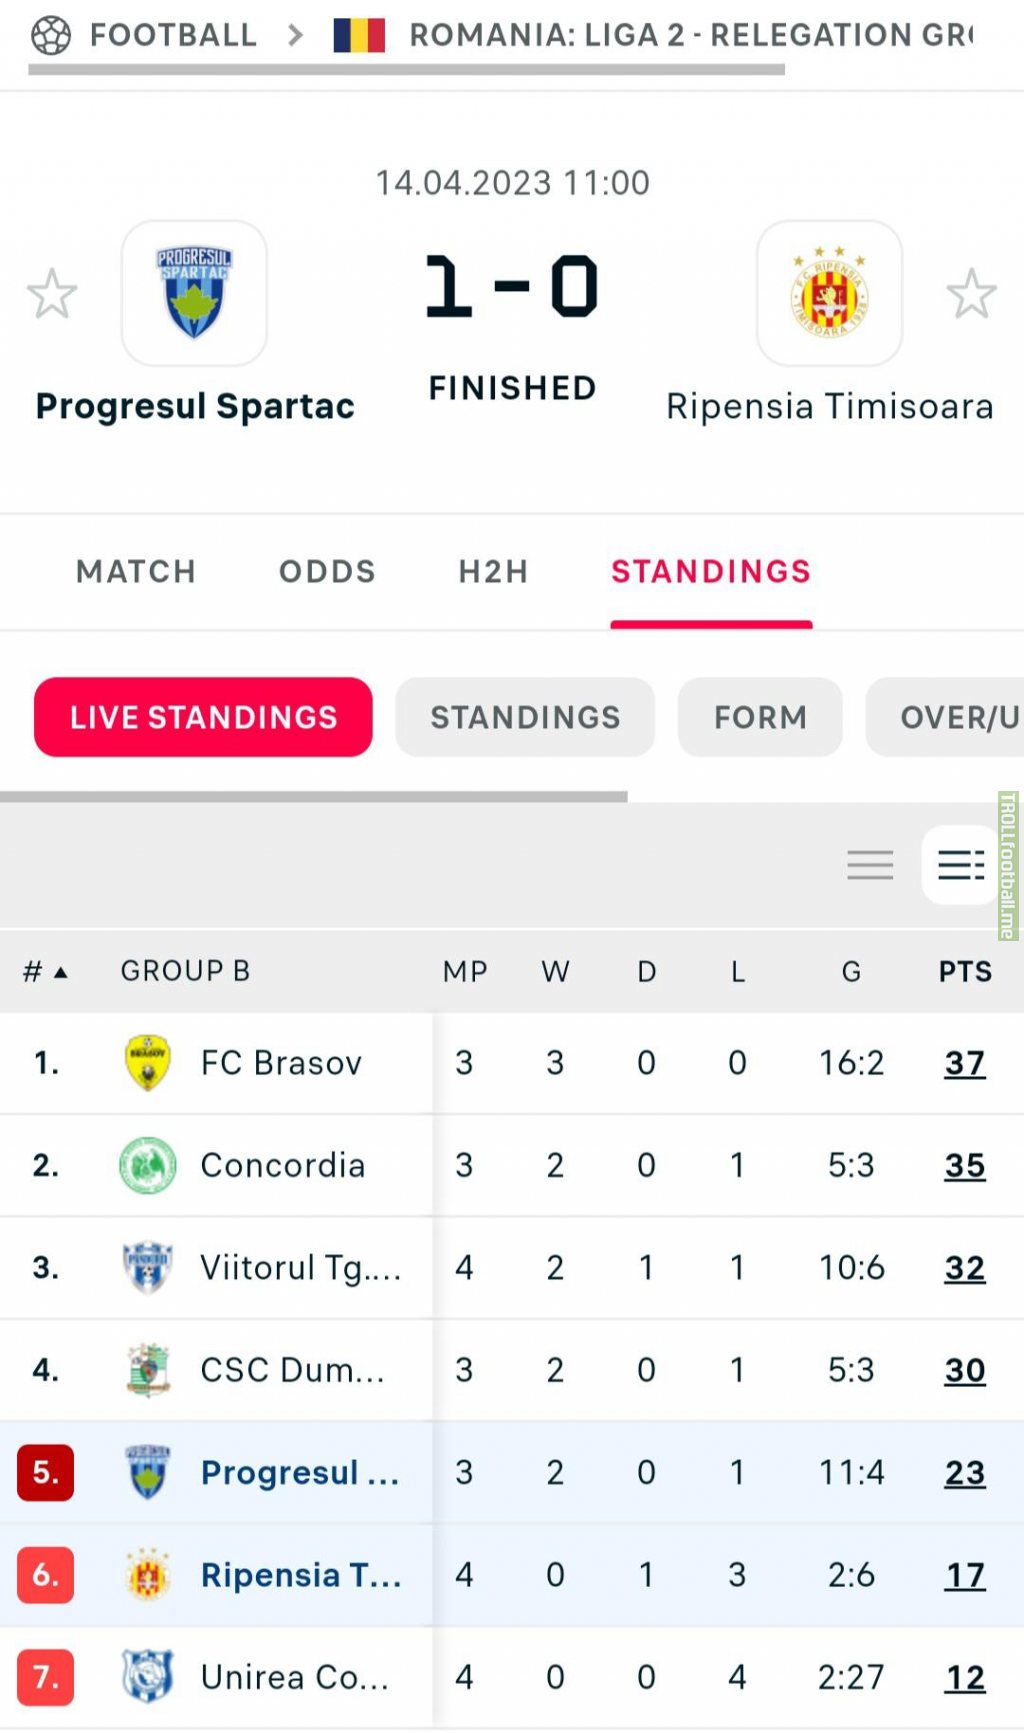 Ripensia Timișoara has relegated for the first time in their history in the third league of Romania